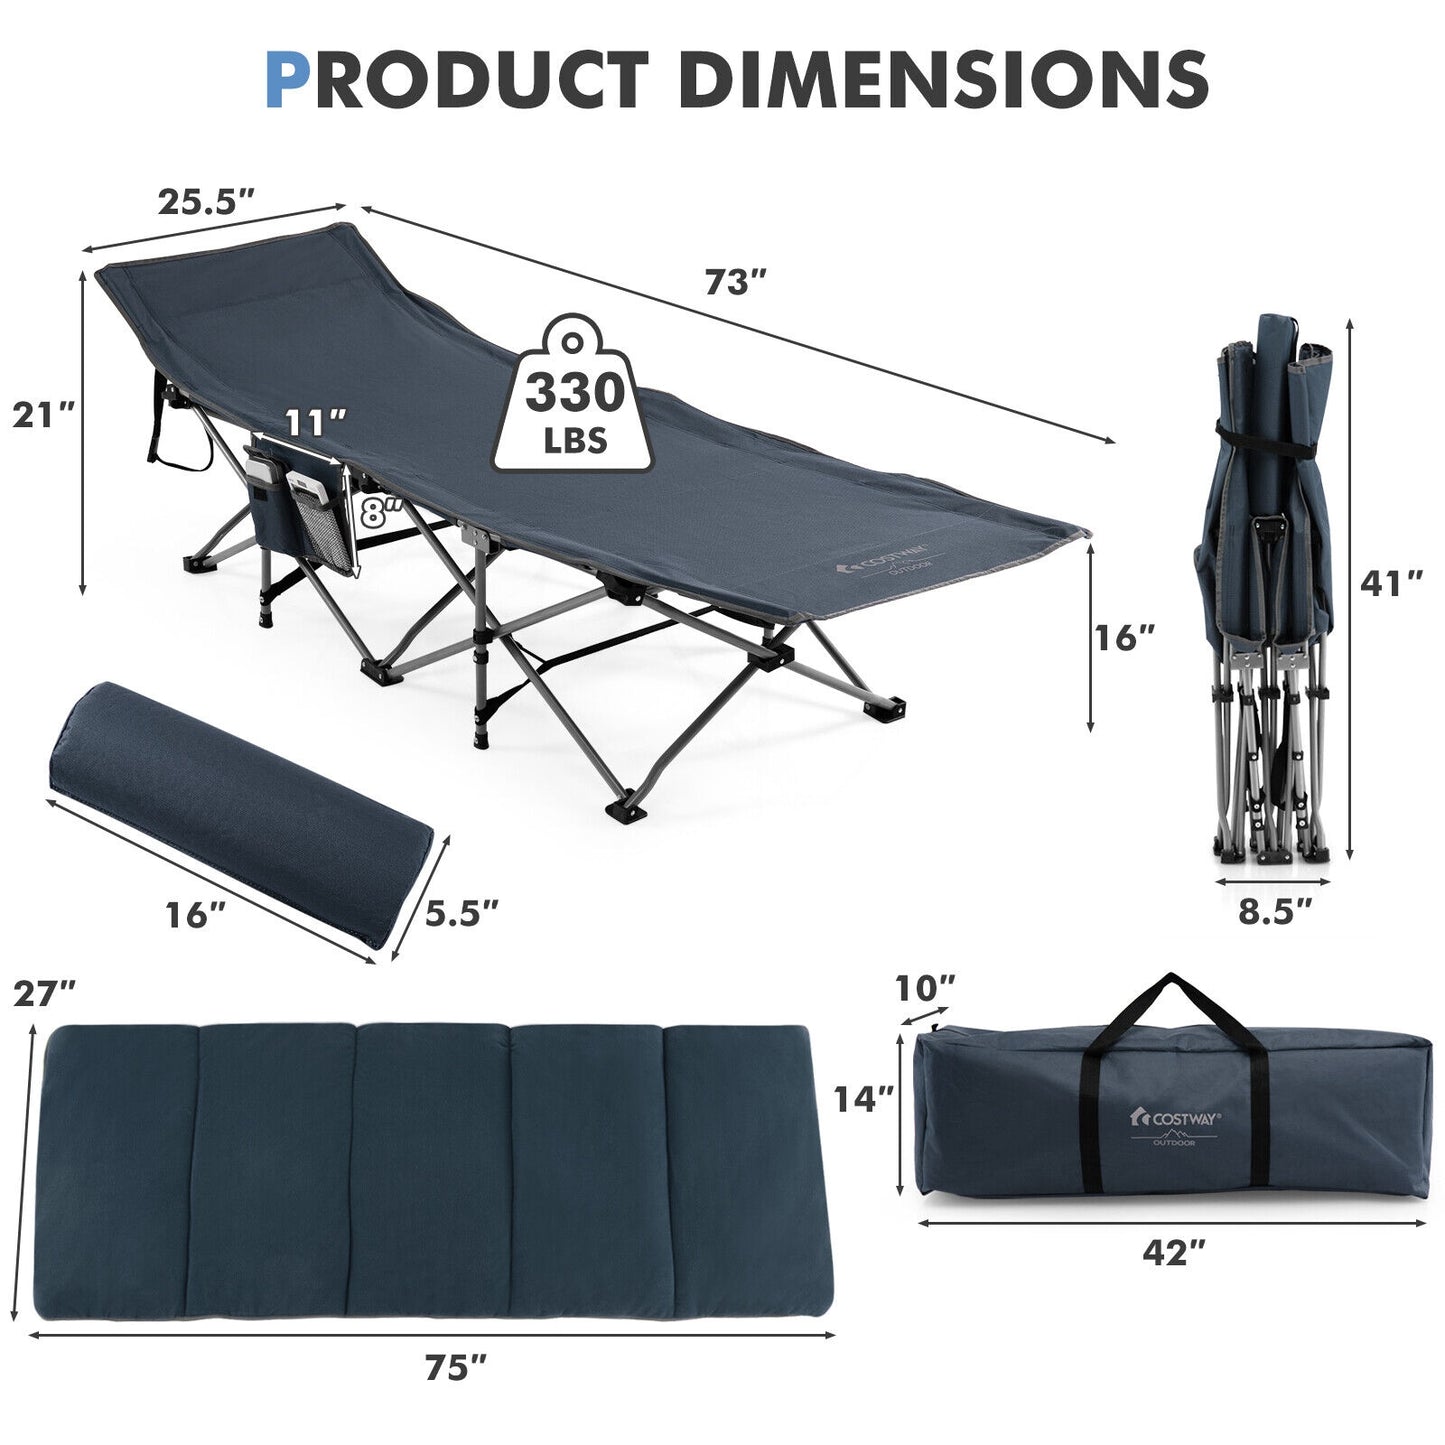 Folding Retractable Travel Camping Cot with Mattress and Carry Bag-Blue